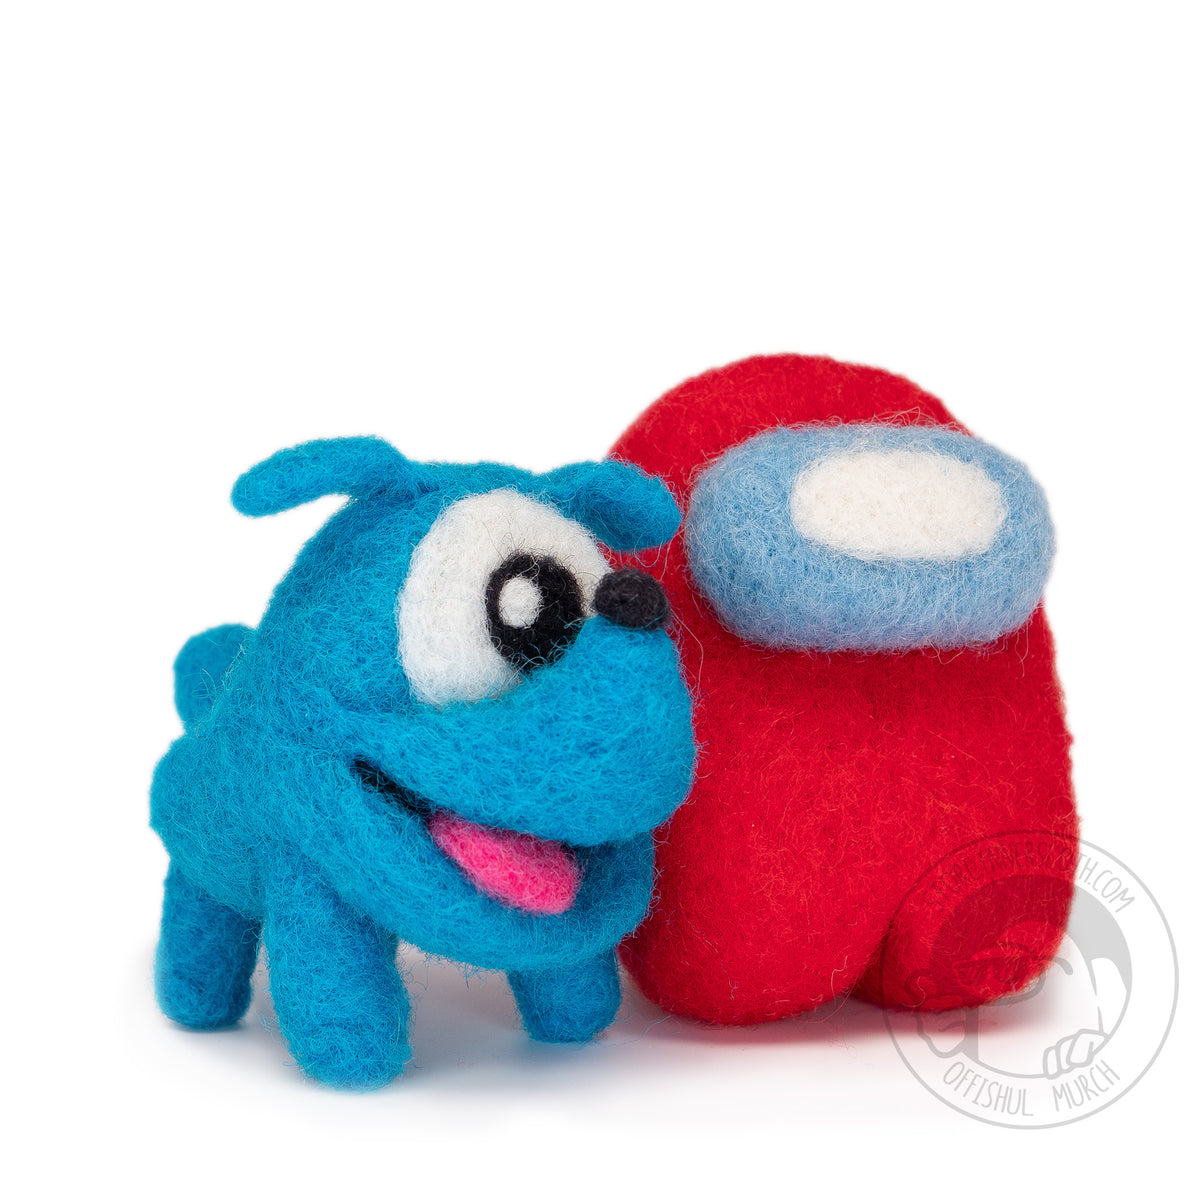 A photograph of the Needle Felted Mini Space Dog and Crewmate by Amarte Studio. The Space Dog is cyan in color with a long snout and black tipped nose. It has one large white eyeball in the center of its face and a black pupil. Its mouth is slightly ajar revealing a pink tongue. The Crewmate is a red rounded bean shape with a light blue visor and a white oval shine in the center. Both figures are standing in a ¾ view next to each other looking to the left on a white background. 